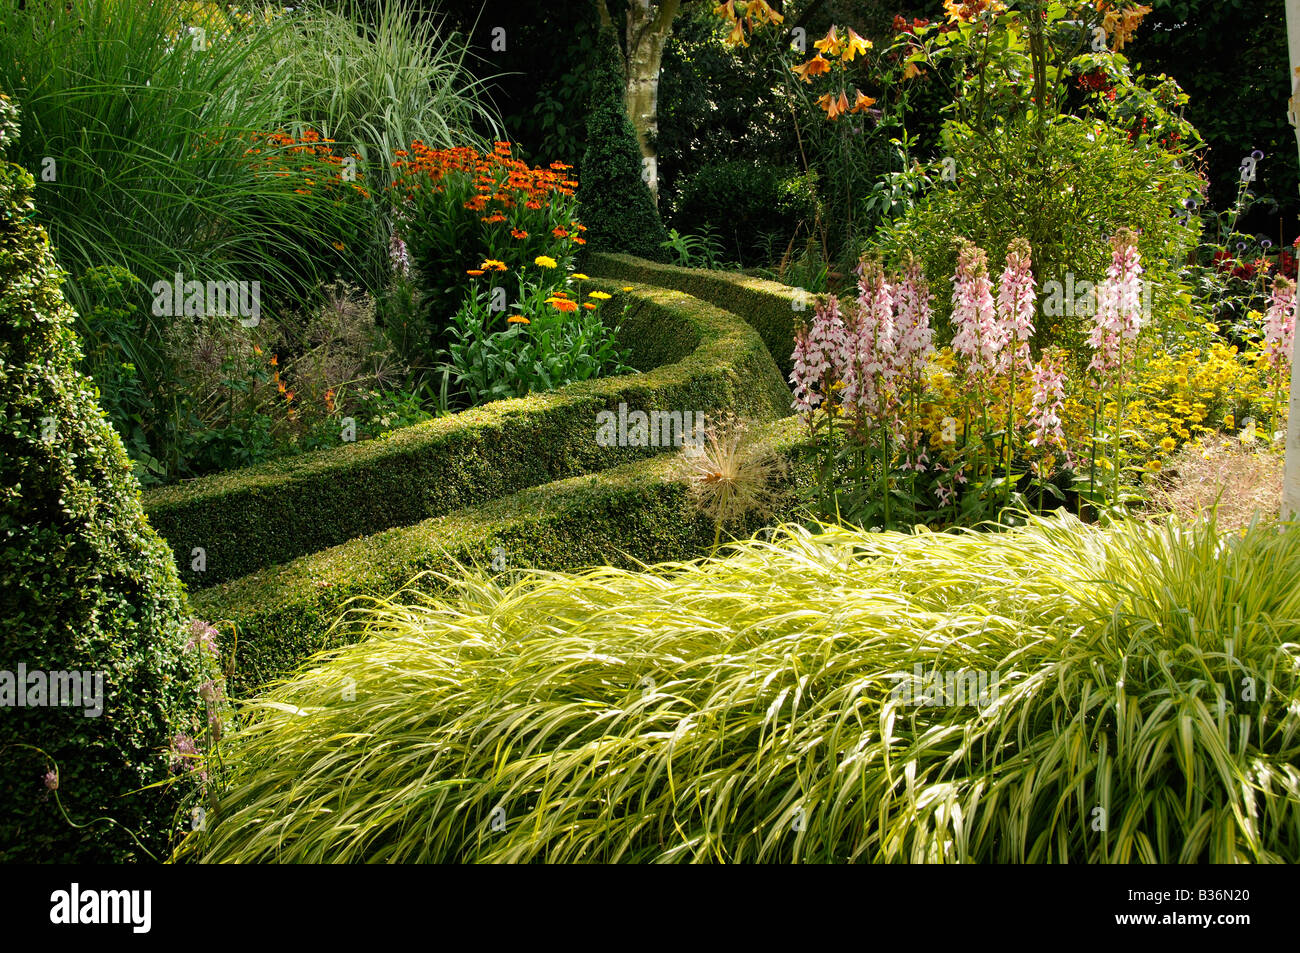 Trimmed boxwood path in shady area of garden with ornamental grasses in fore ground UK July Stock Photo